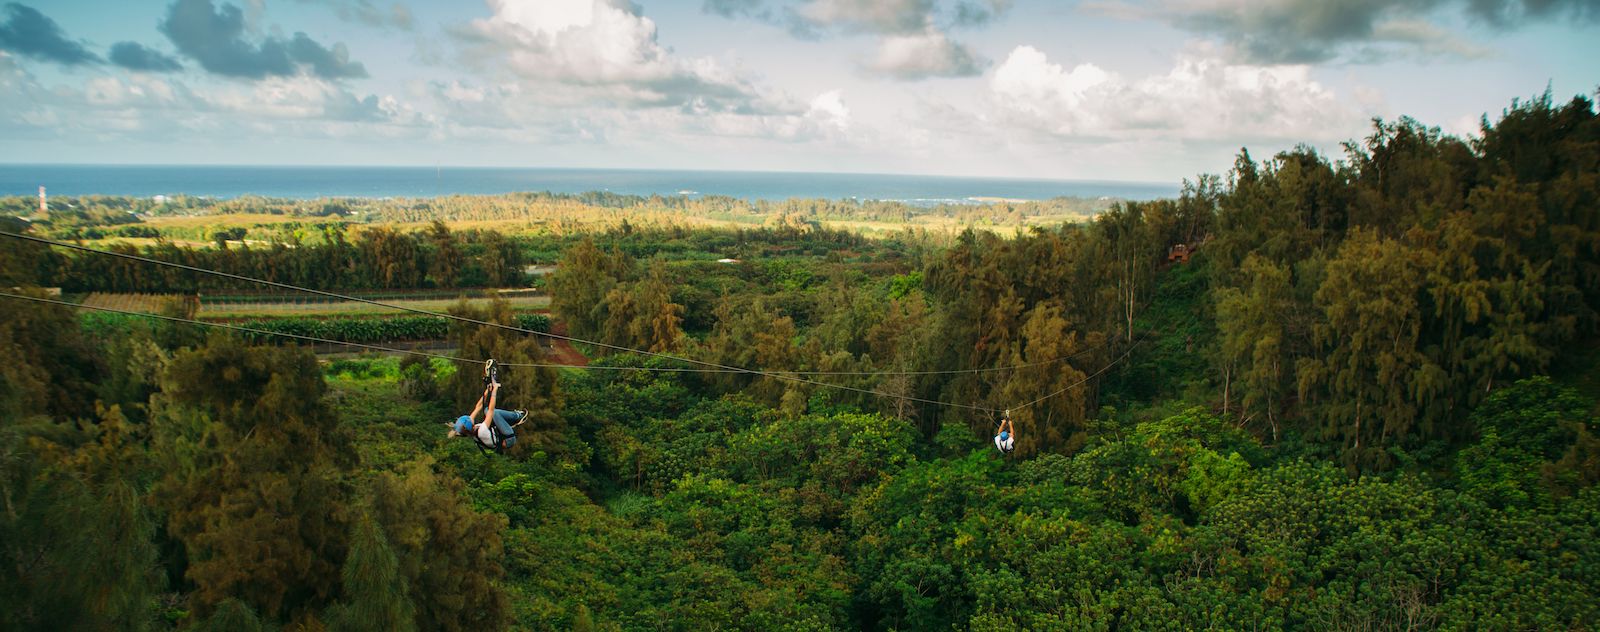 5 Things That You Will Enjoy While Experiencing Our Ziplines on Oahu